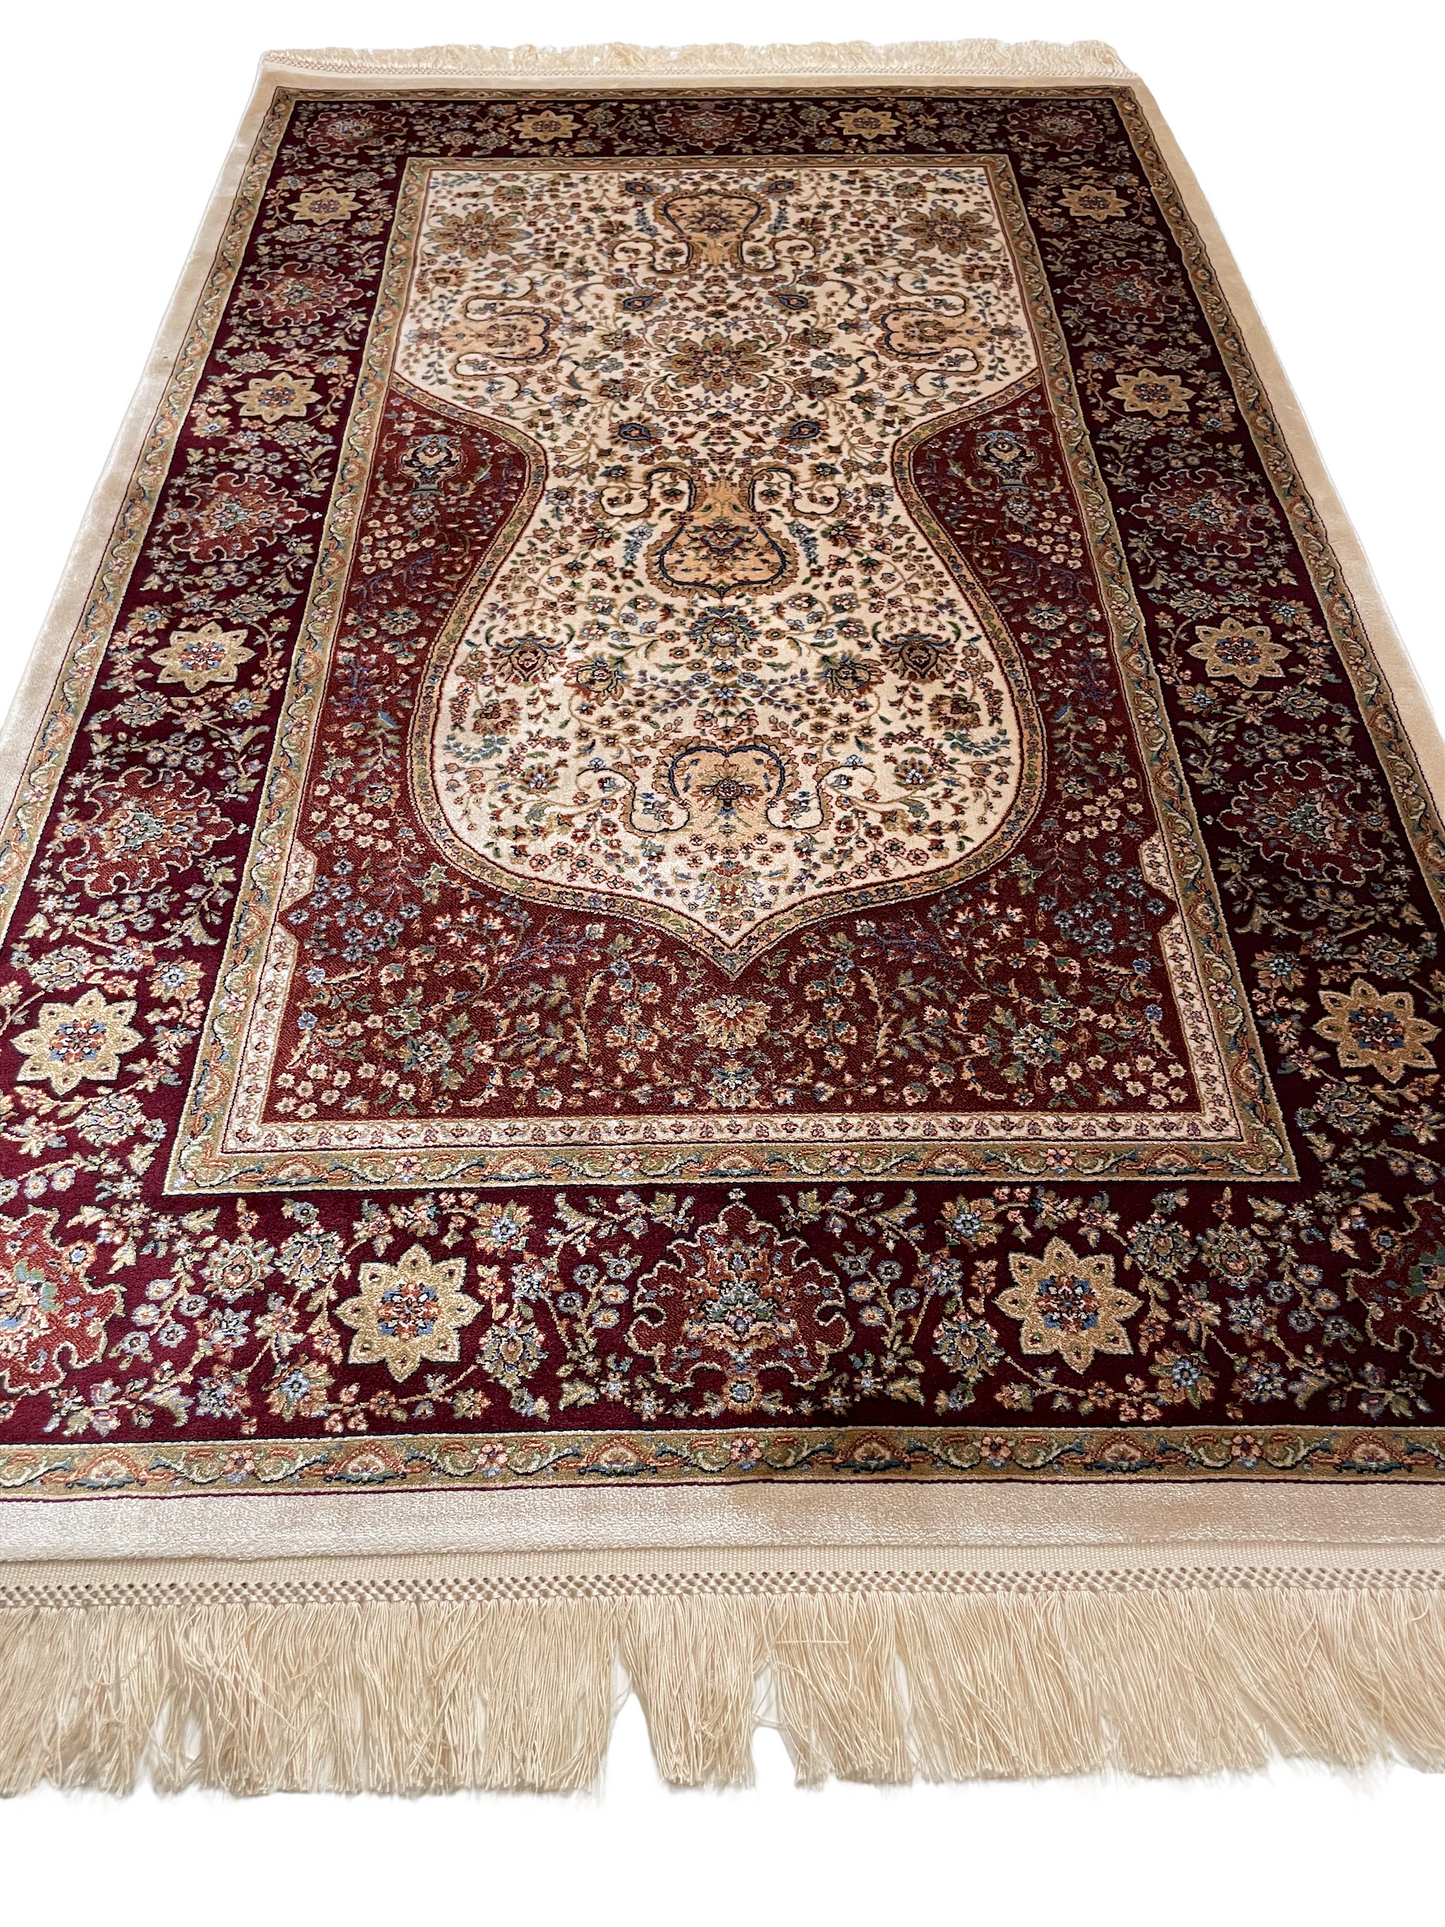 The Himma rug displays the traditional Islamic "mihrab" design with elegant floral elements.